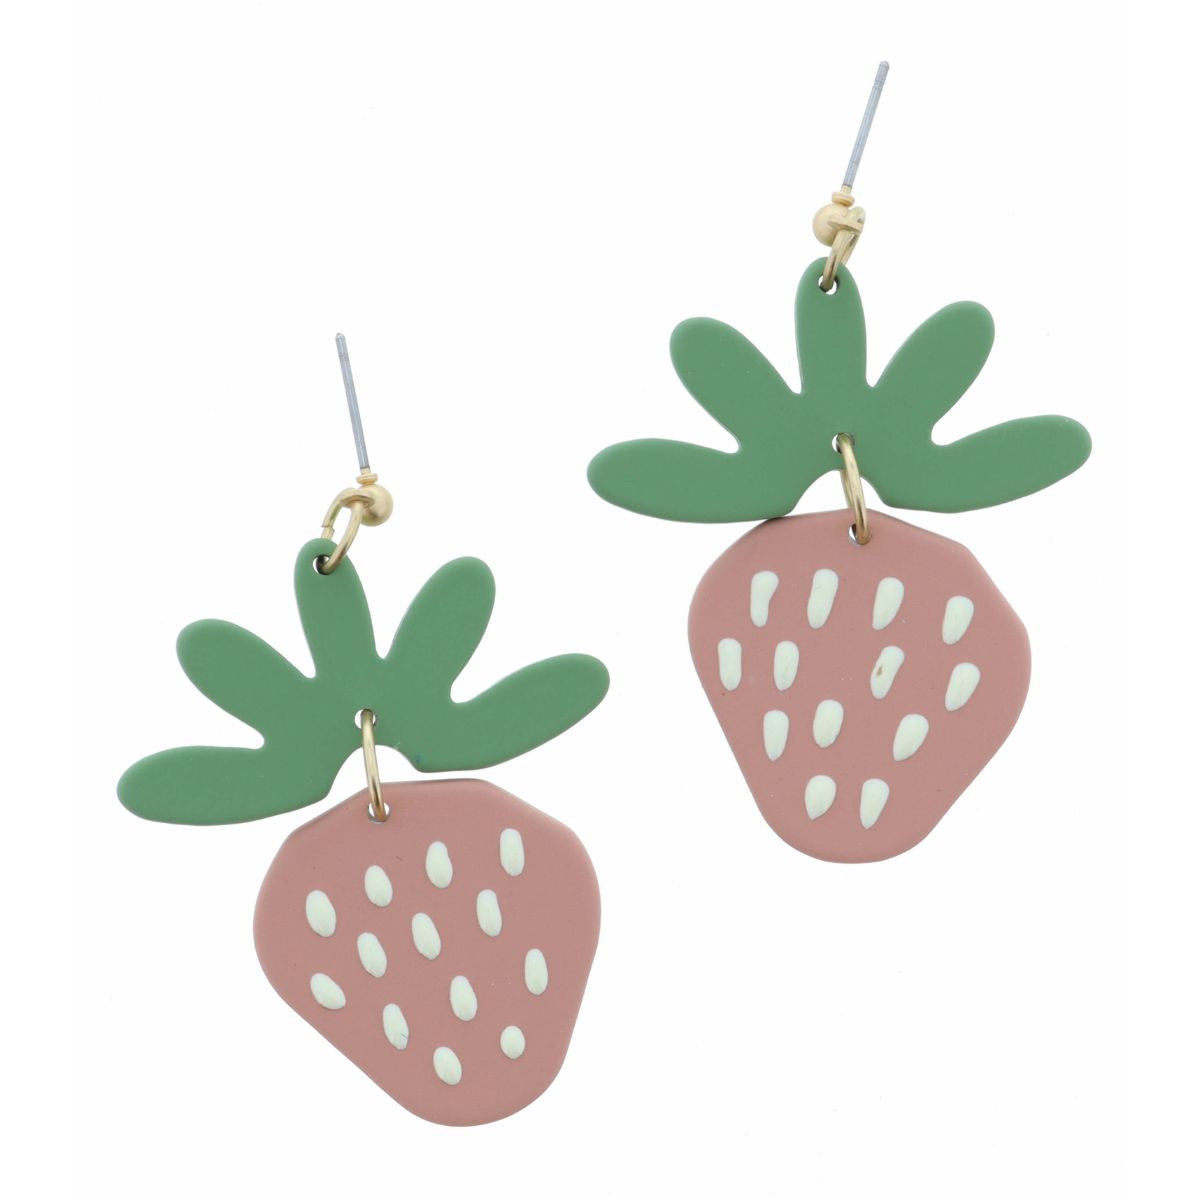 The Blush Earring Collection